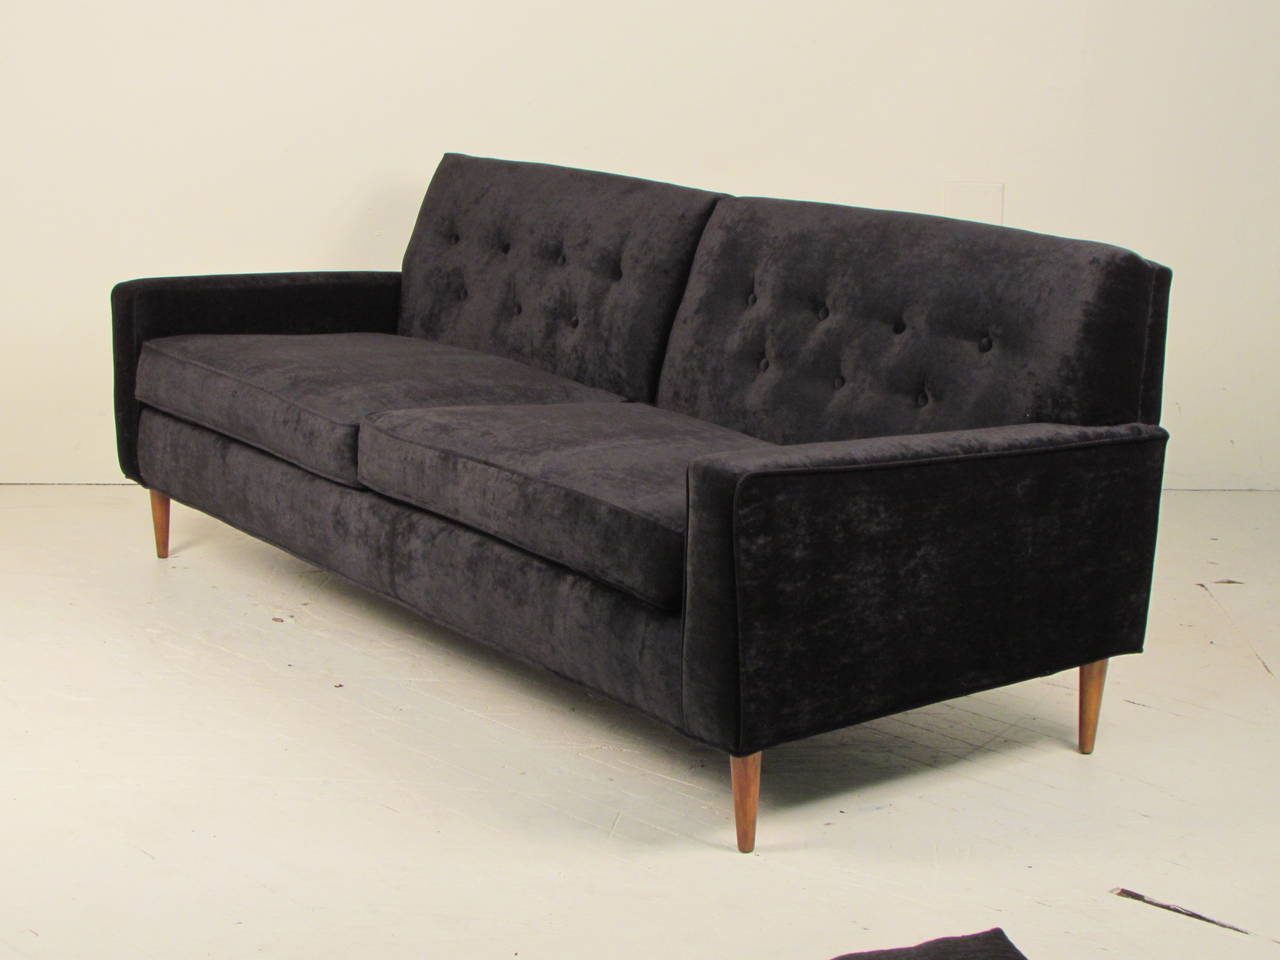 Glamorous black velvet sofa in the style of Milo Baughman. This piece has been completely restored and reupholstered in a fantastic upholstery velvet. Beautiful button detail on back cushions. Very comfortable and excellent quality. This is a 75